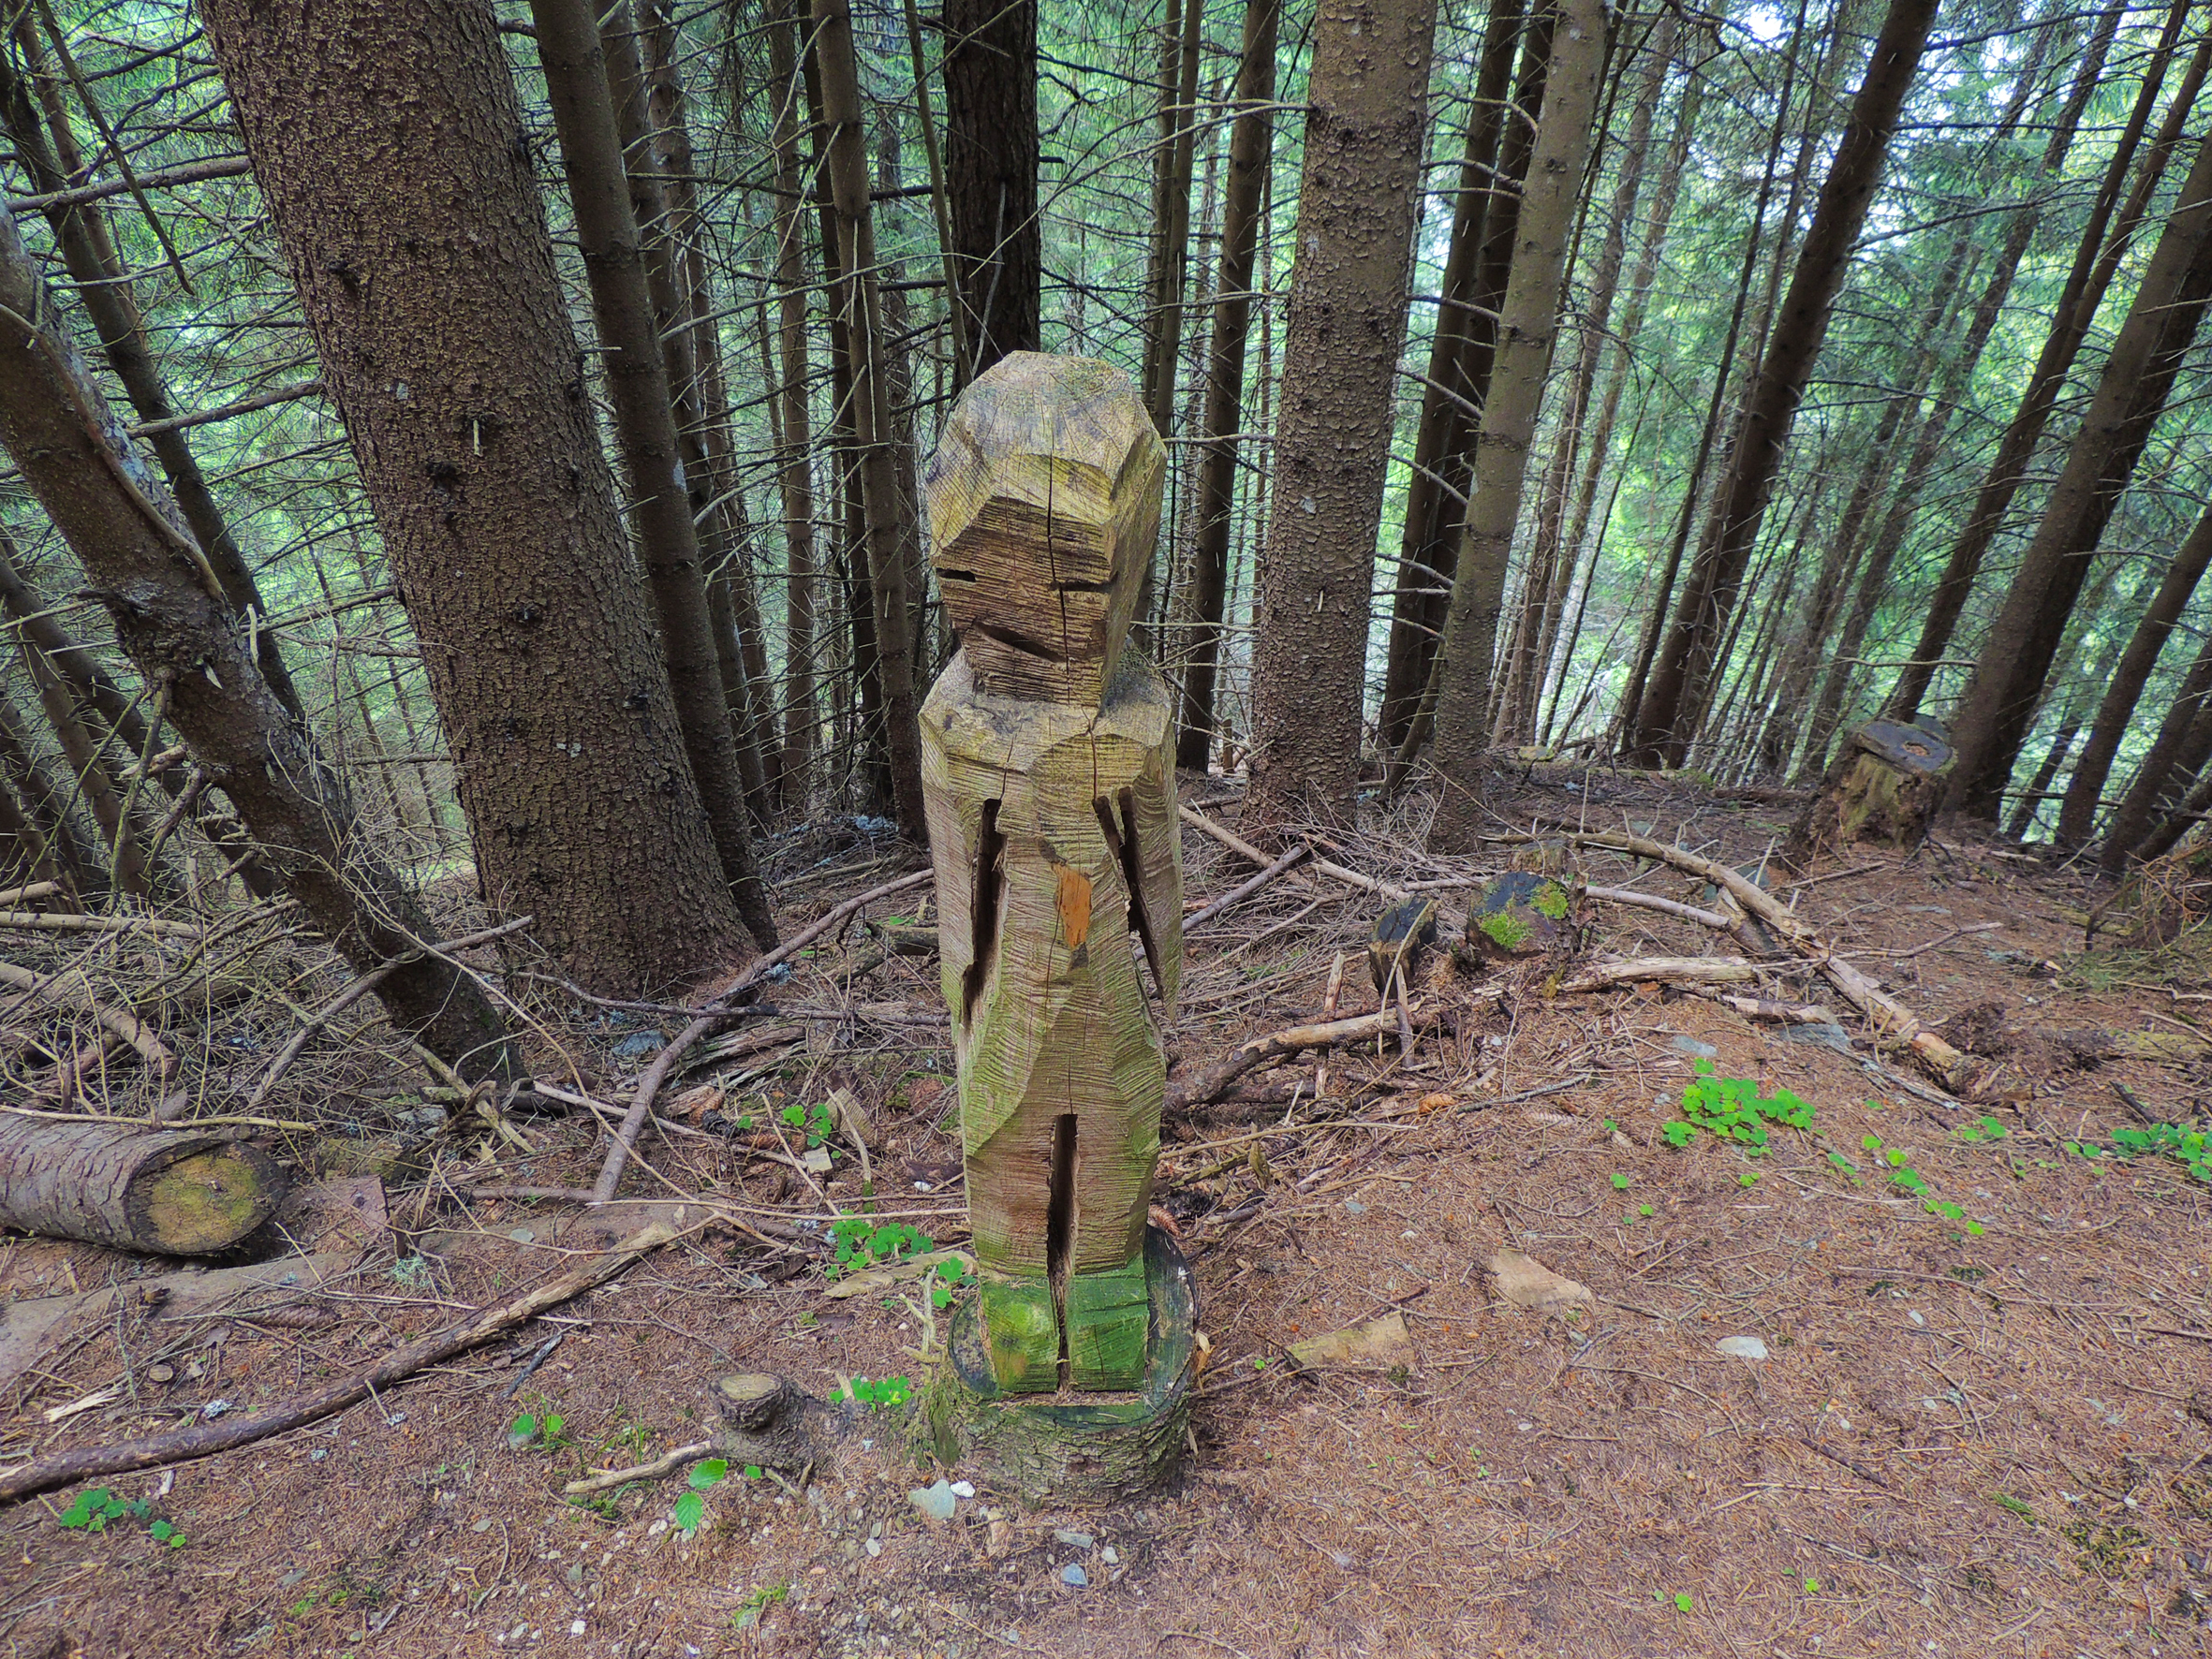 man made, carving, forest, wooden